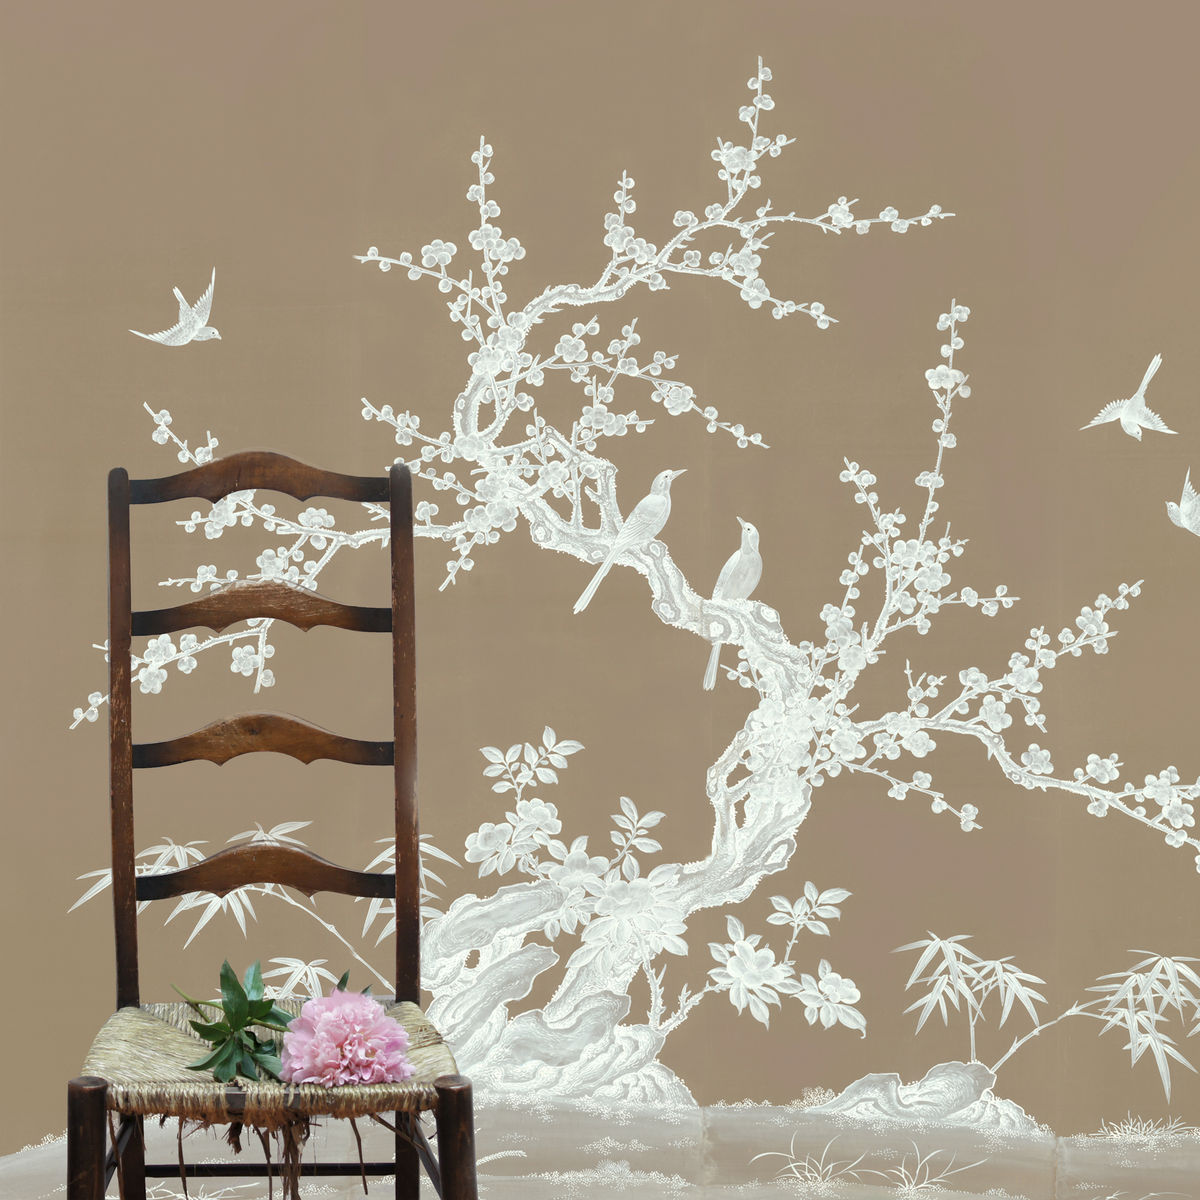 Porcelain Bird Chinoiserie Wallpaper   product images of 1200x1200